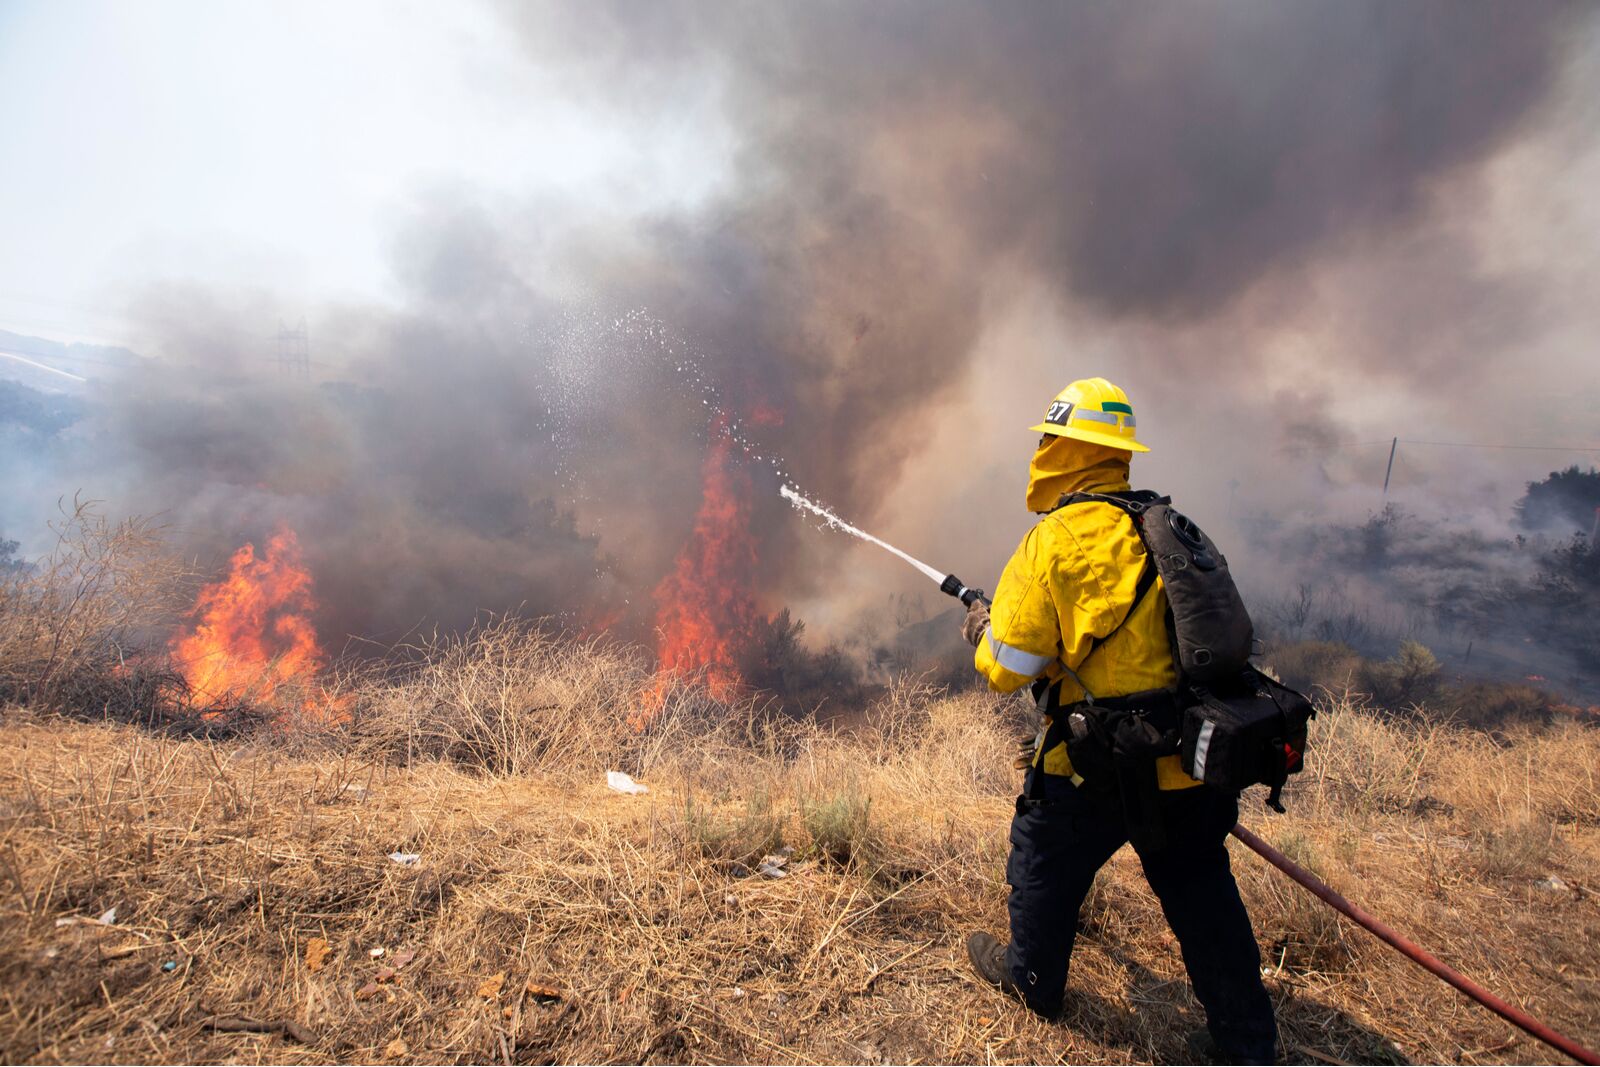 hiking robots could help fight wildfires